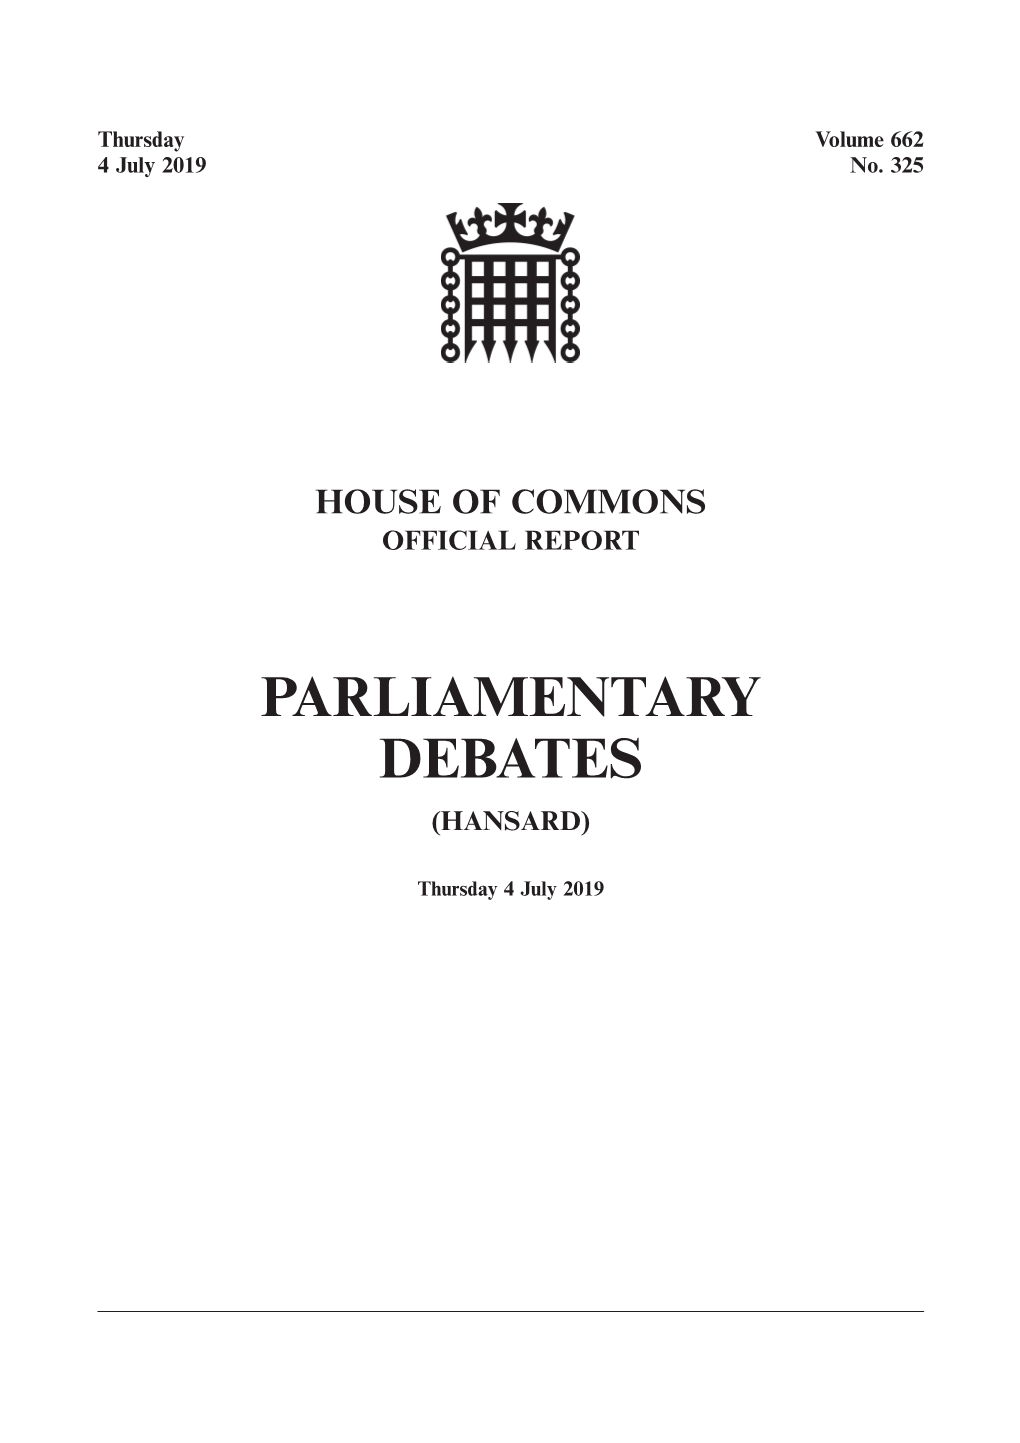 Whole Day Download the Hansard Record of the Entire Day in PDF Format. PDF File, 1.02